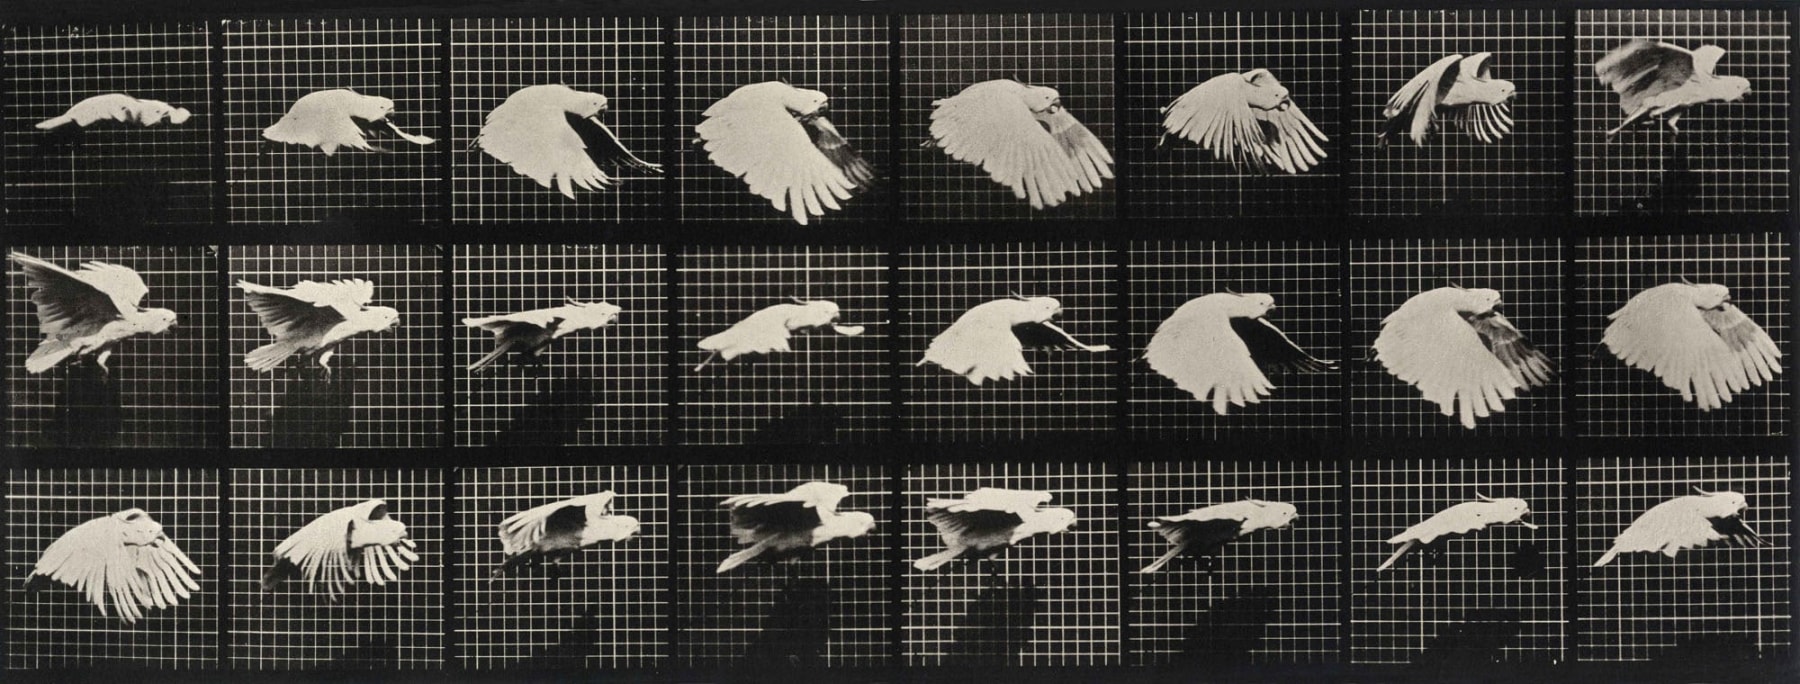 Sequence of black and white photos showing the movements of a cockatoo in flight